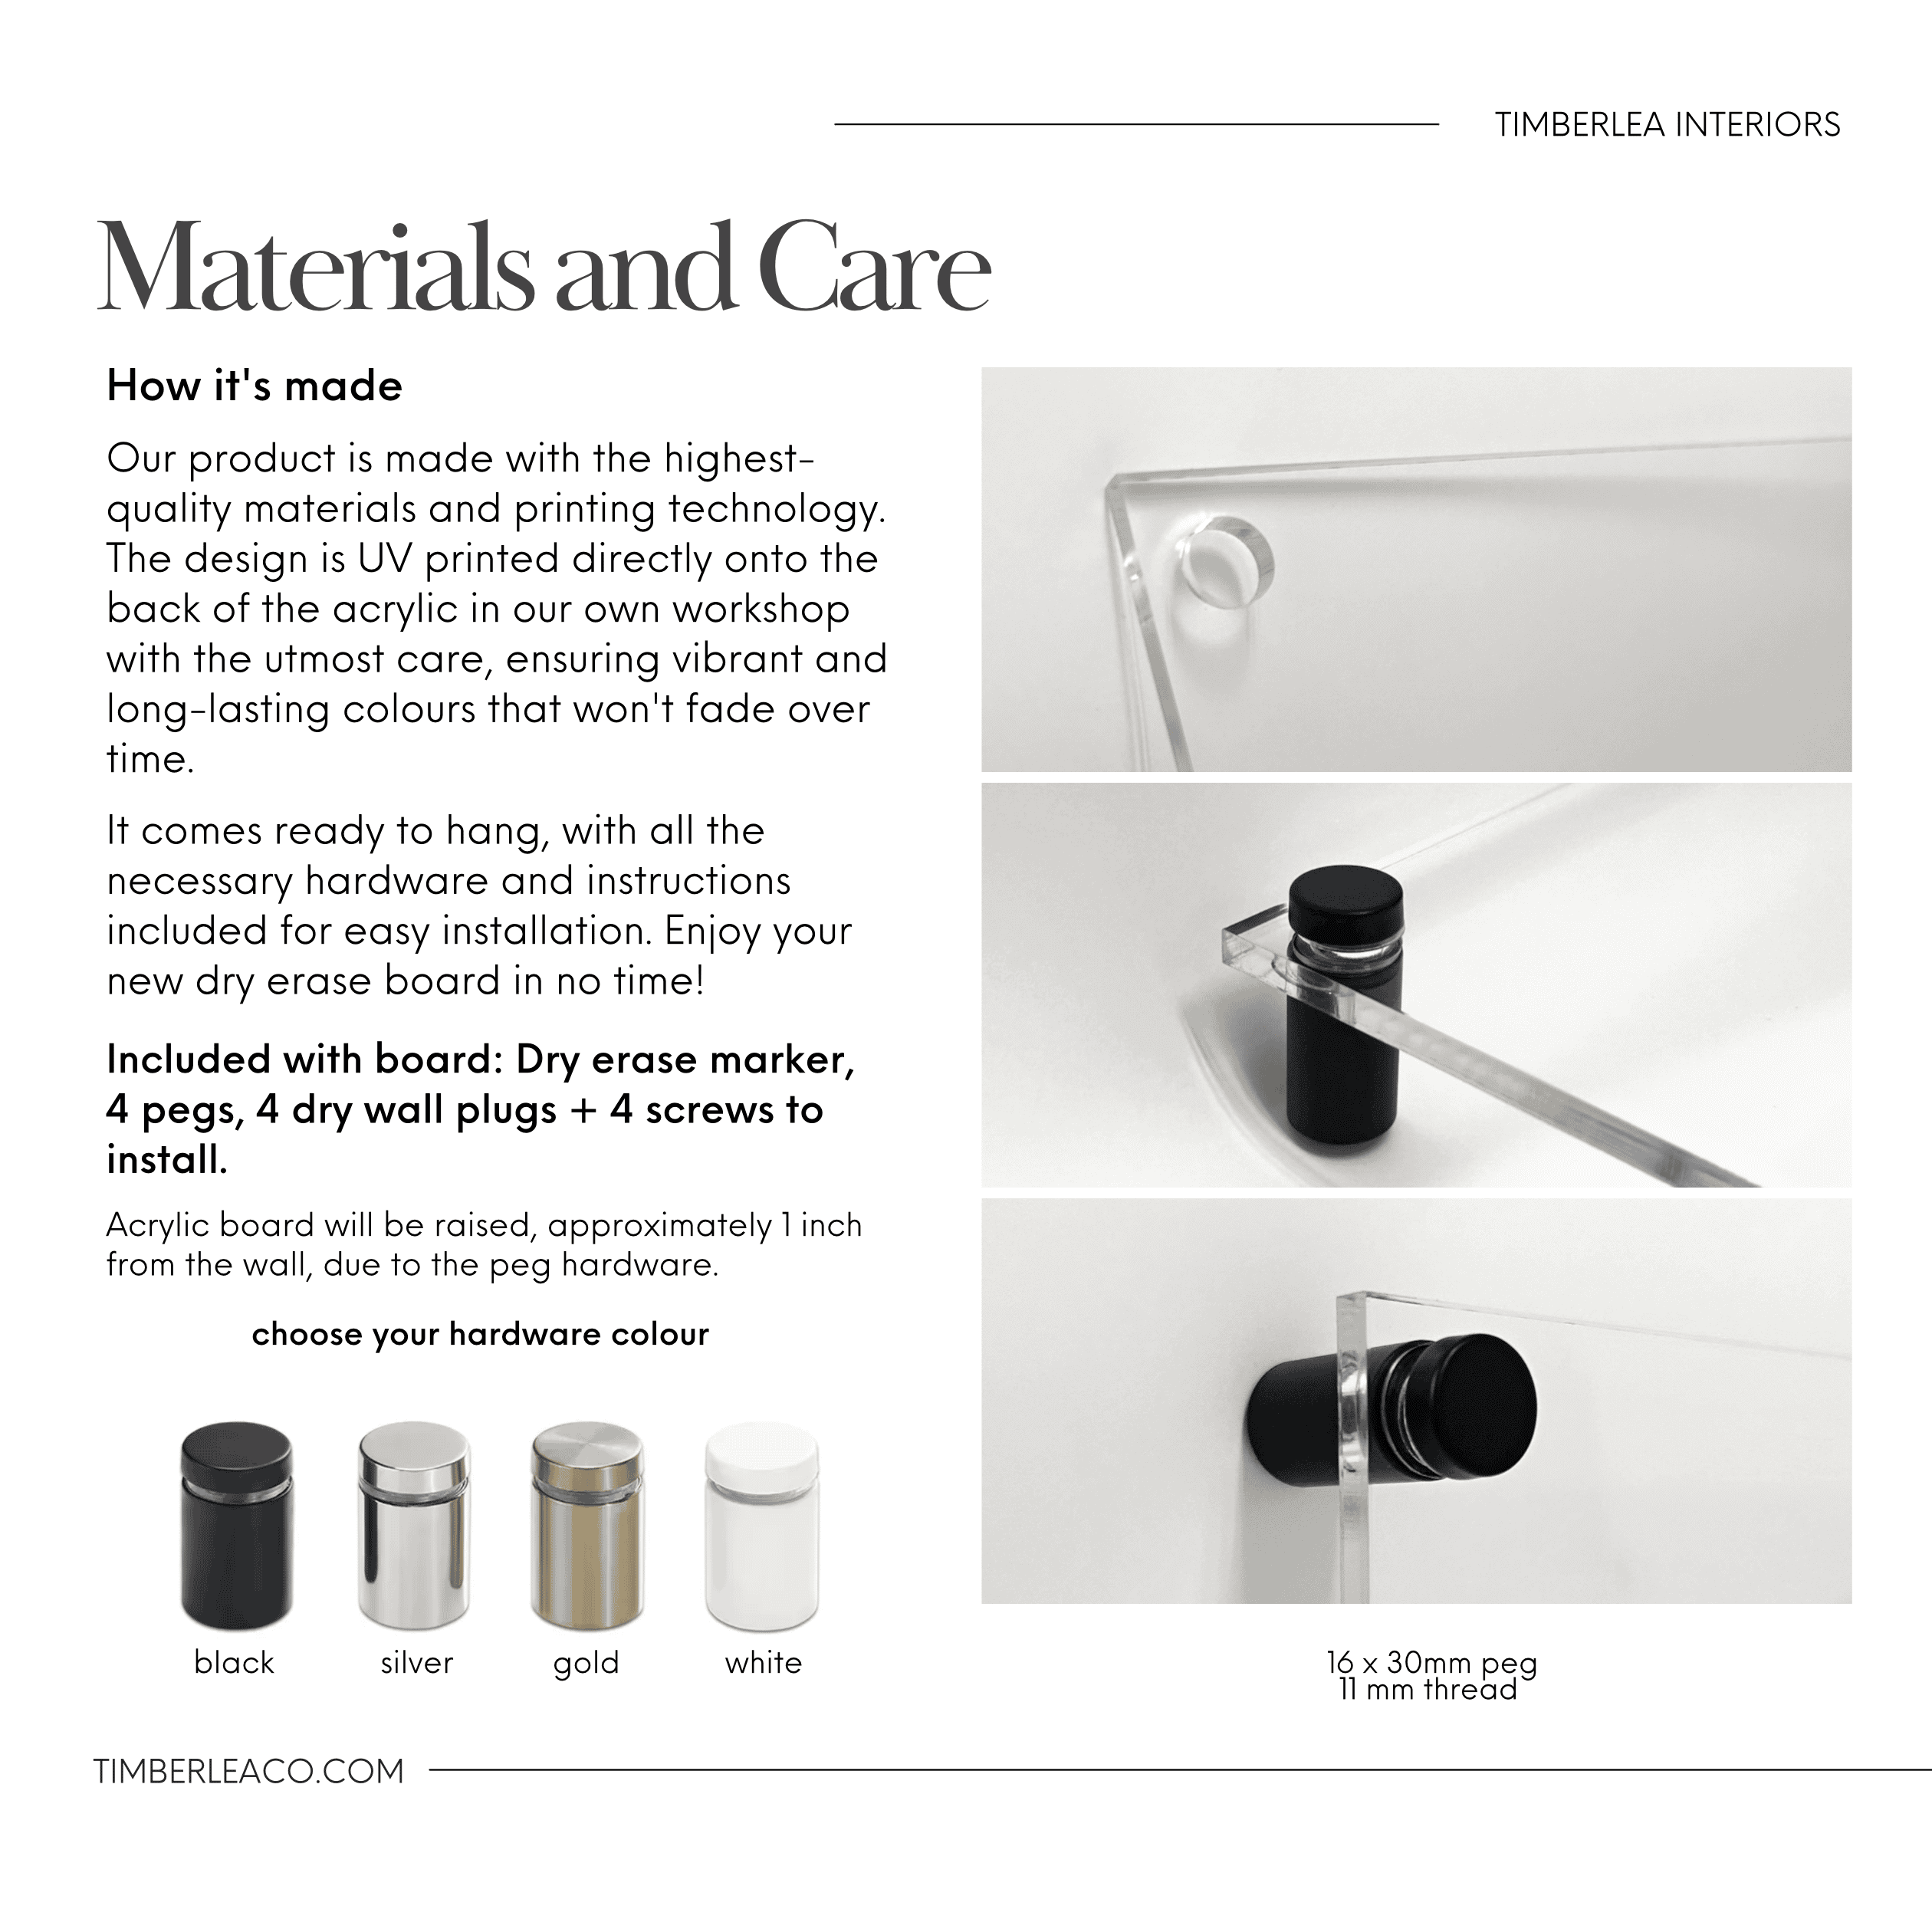 "Materials and Care" information page detailing the high-quality materials and printing technology used, with images of the mounting hardware and various hardware color options.